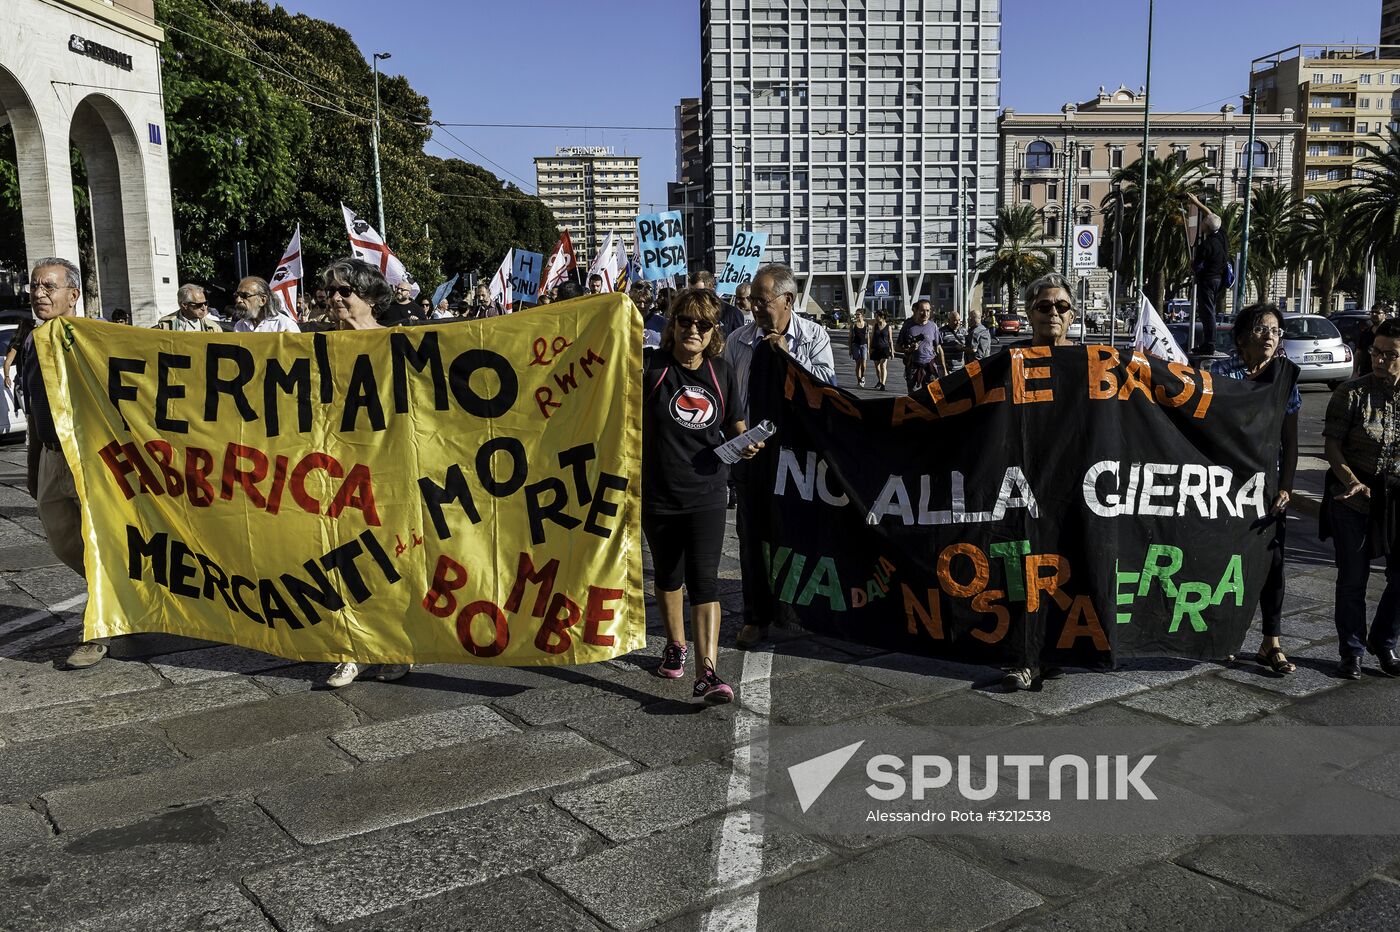 Protest against NATO in Italy